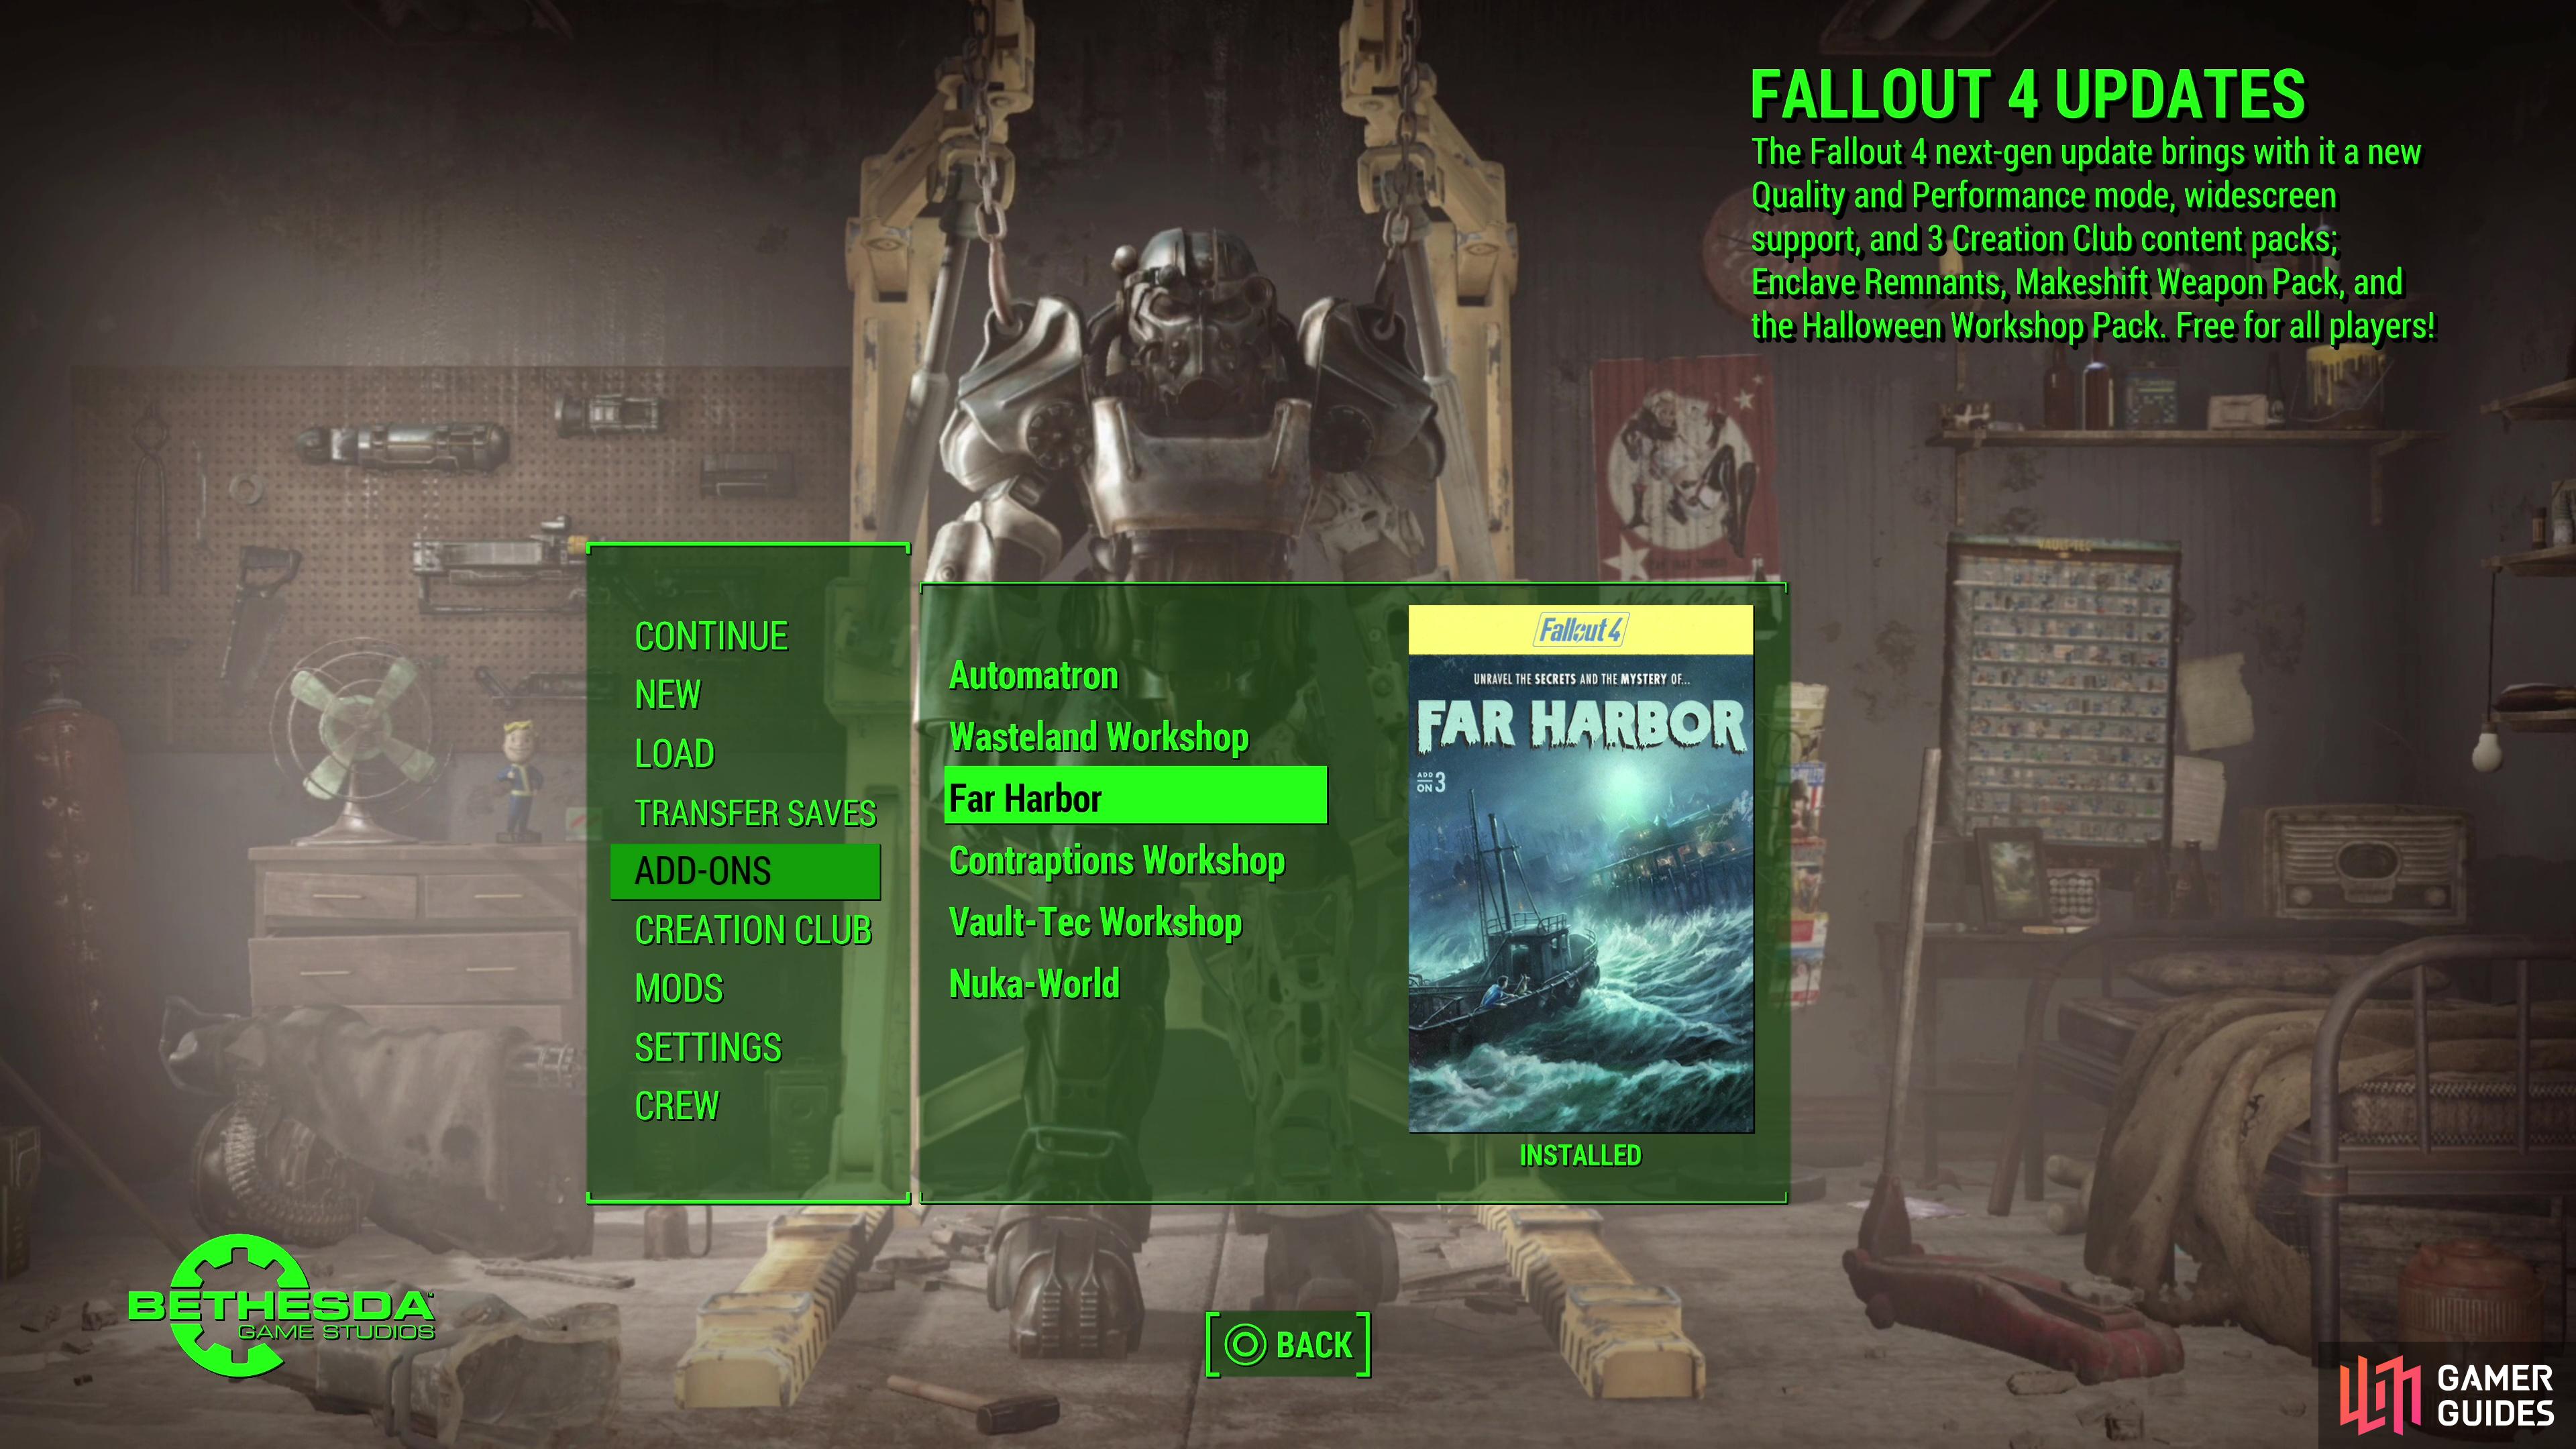 There are six DLCs you can purchase for Fallout 4 - excluding Creation Club content.